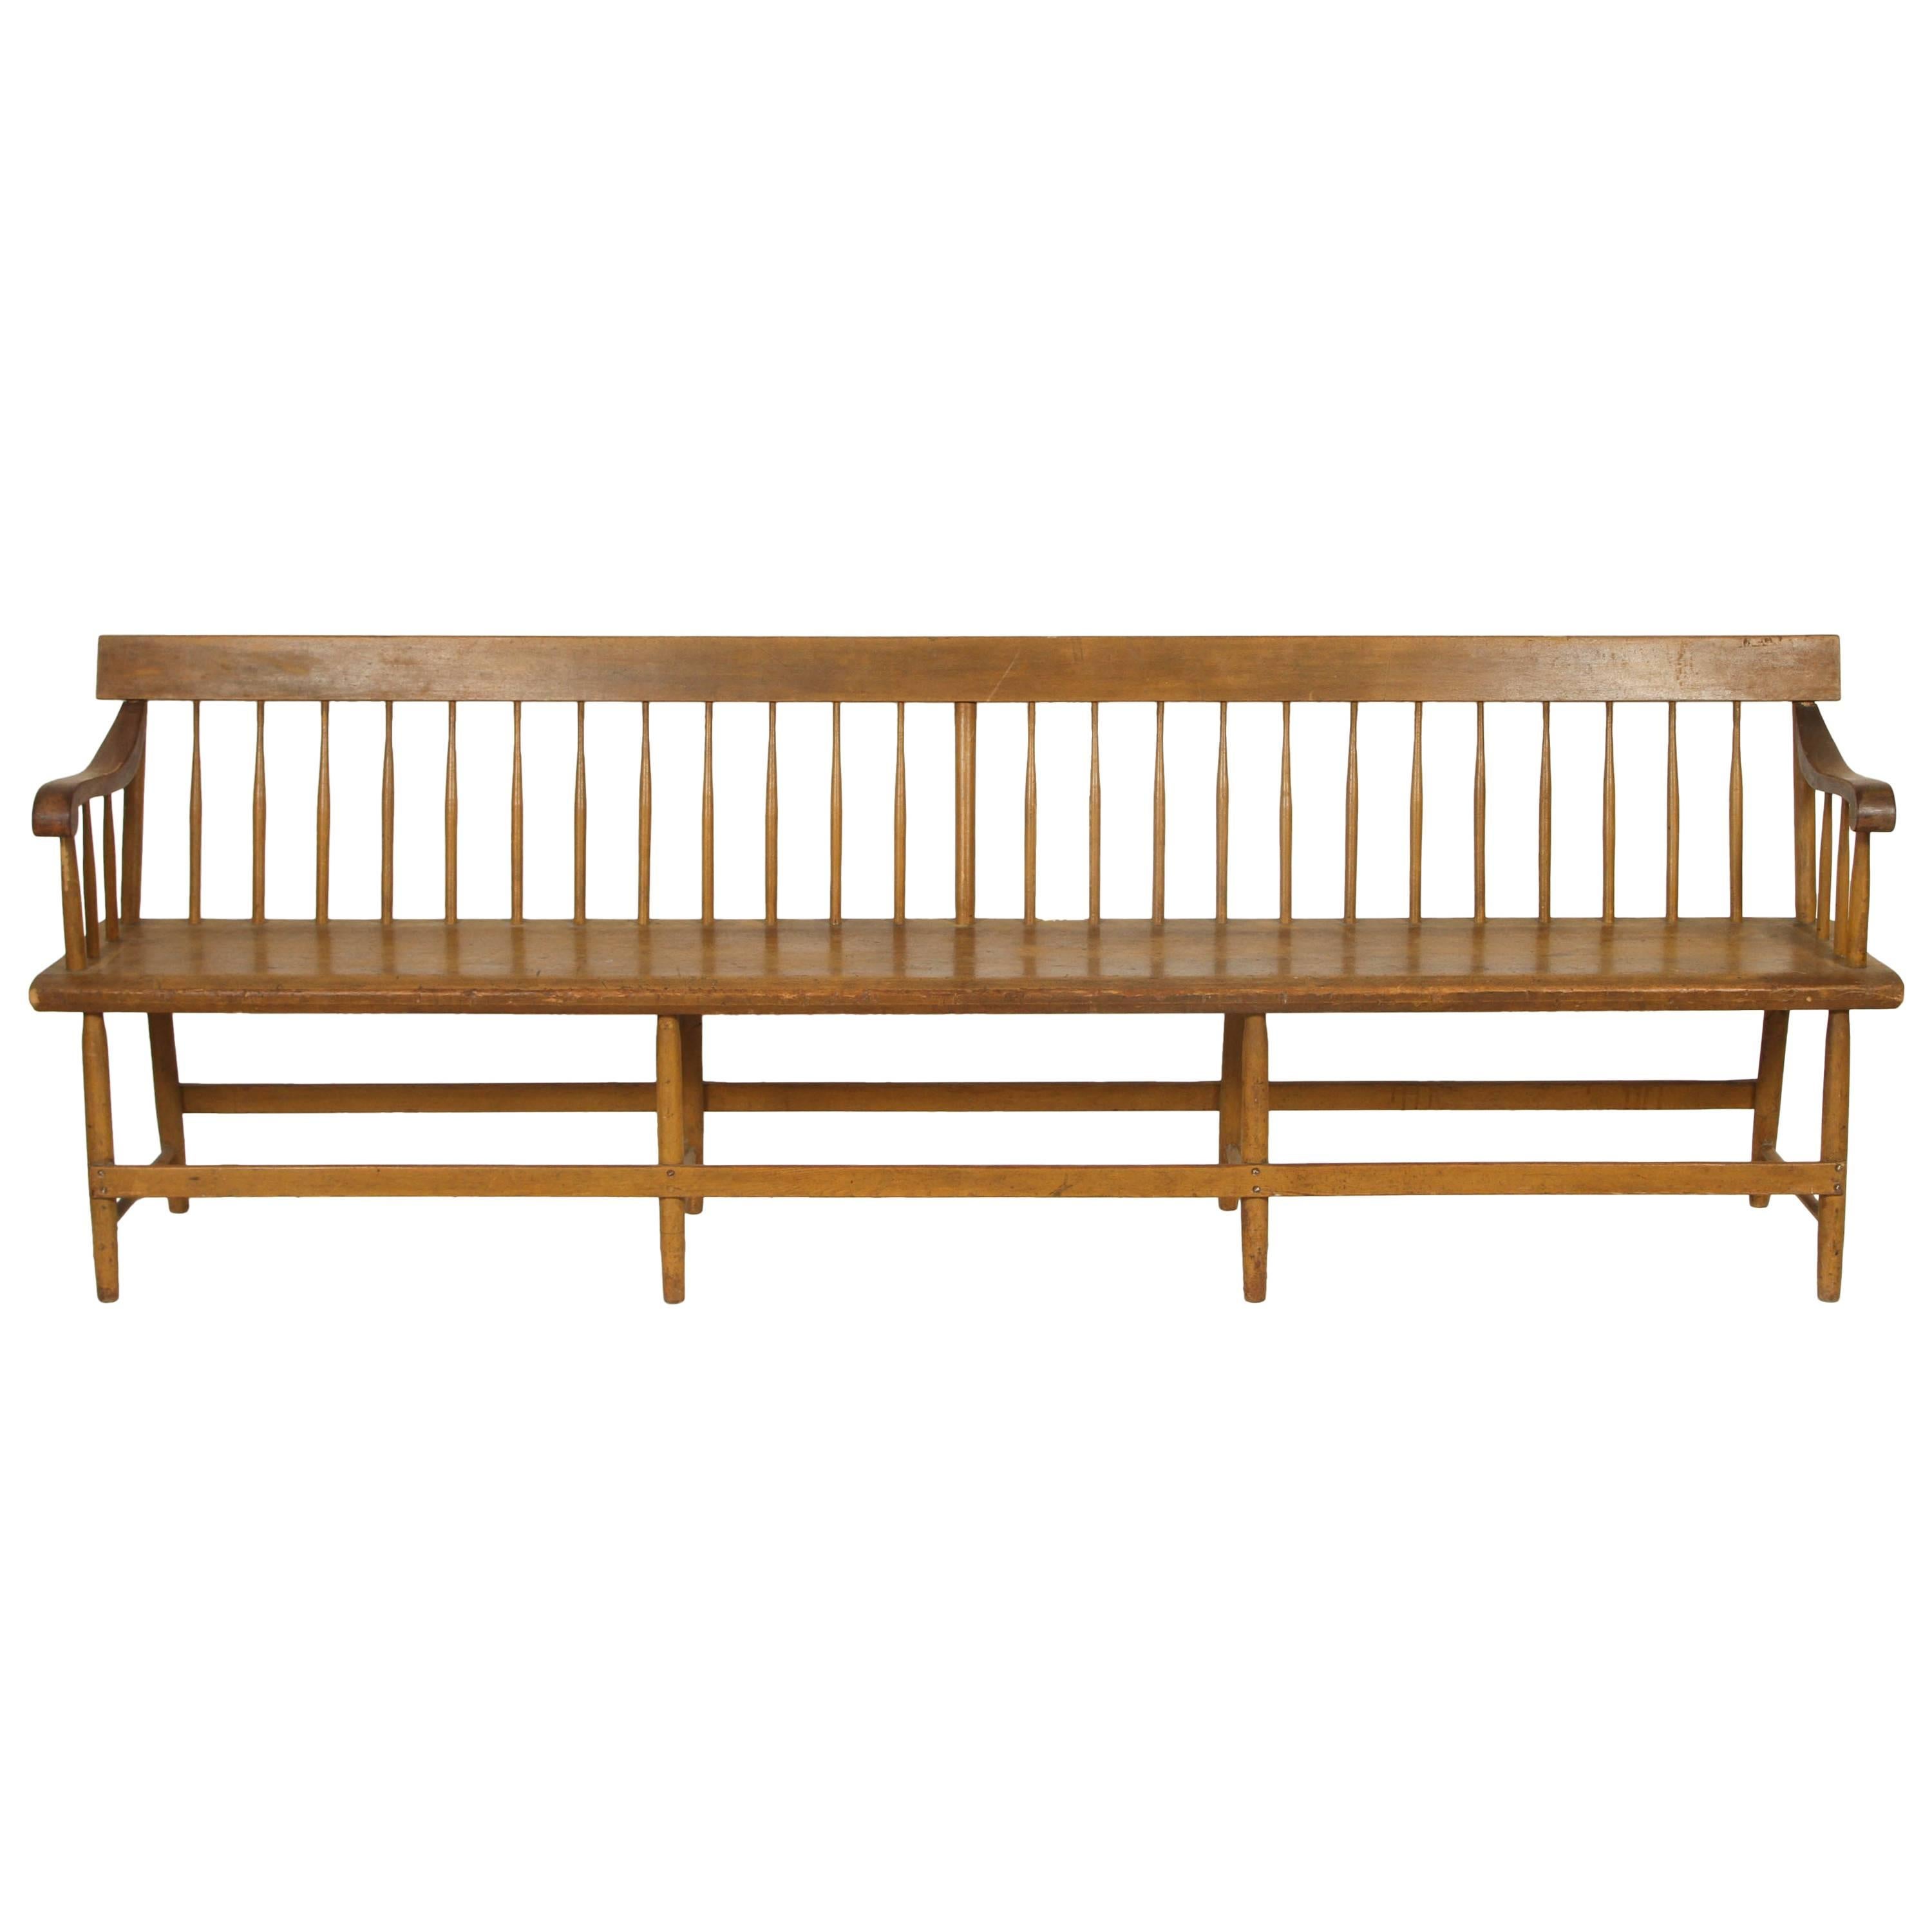 Long Spindle Back Deacon Bench